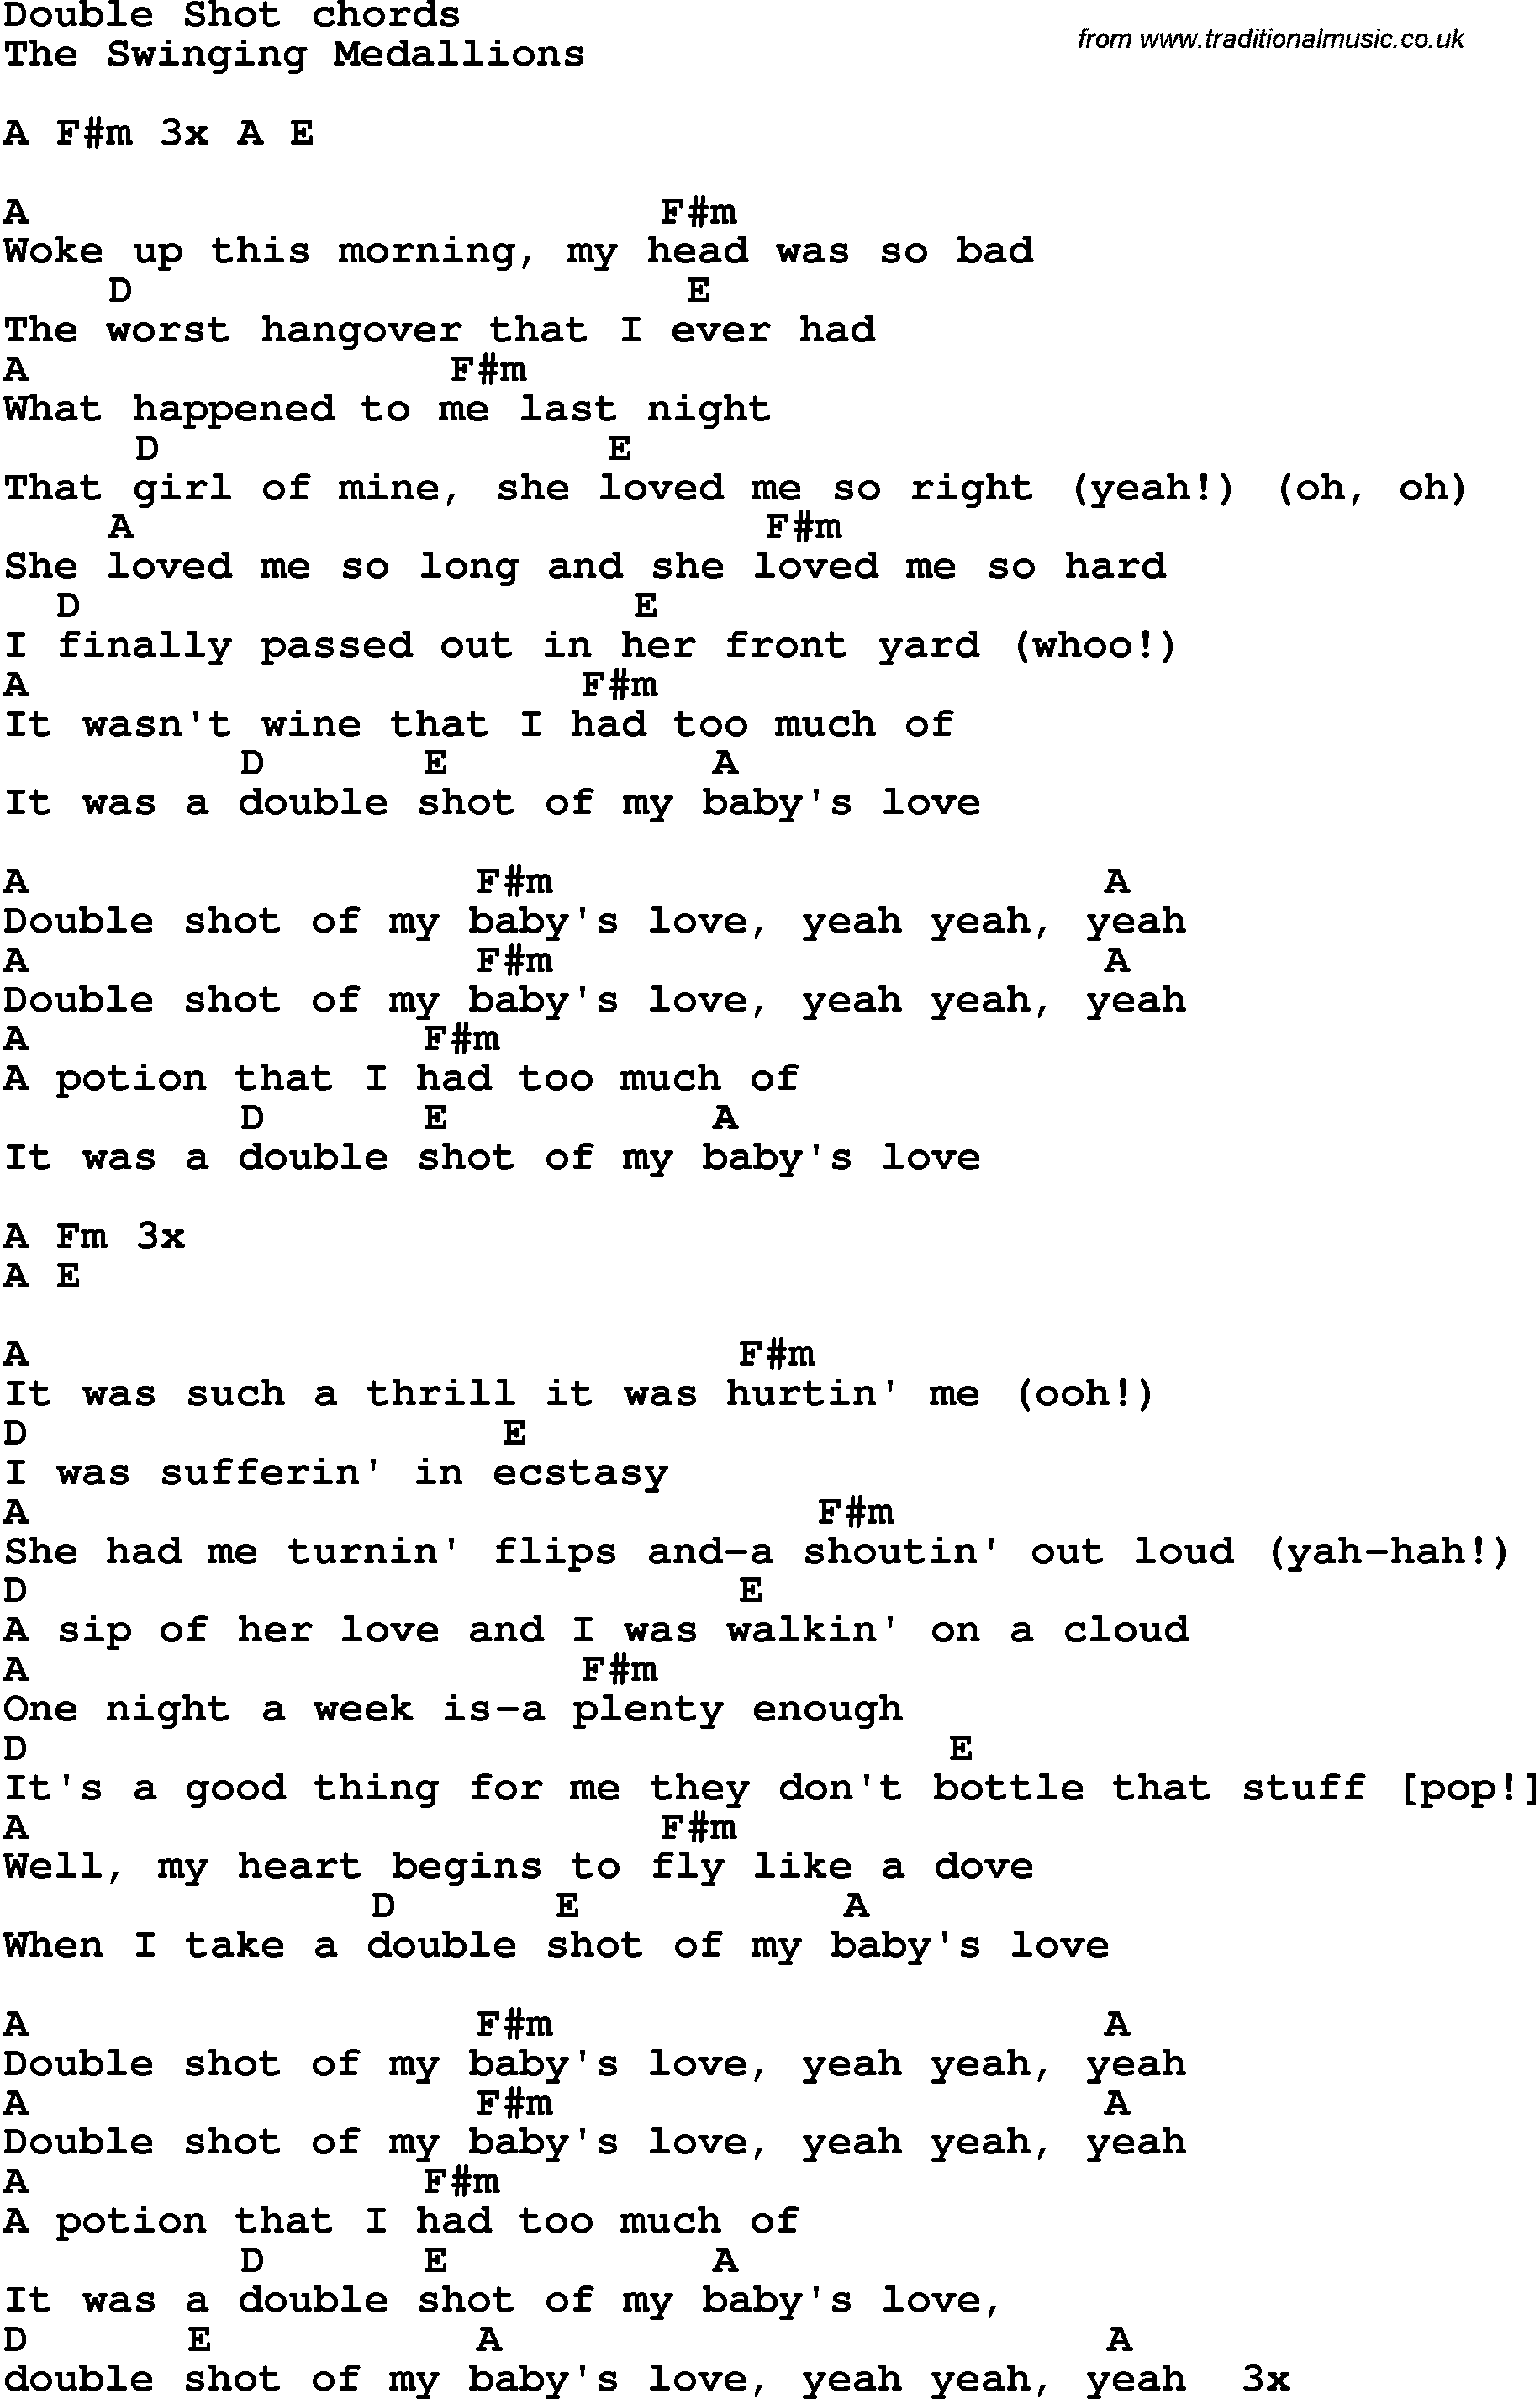 Song Lyrics with guitar chords for Double Shot